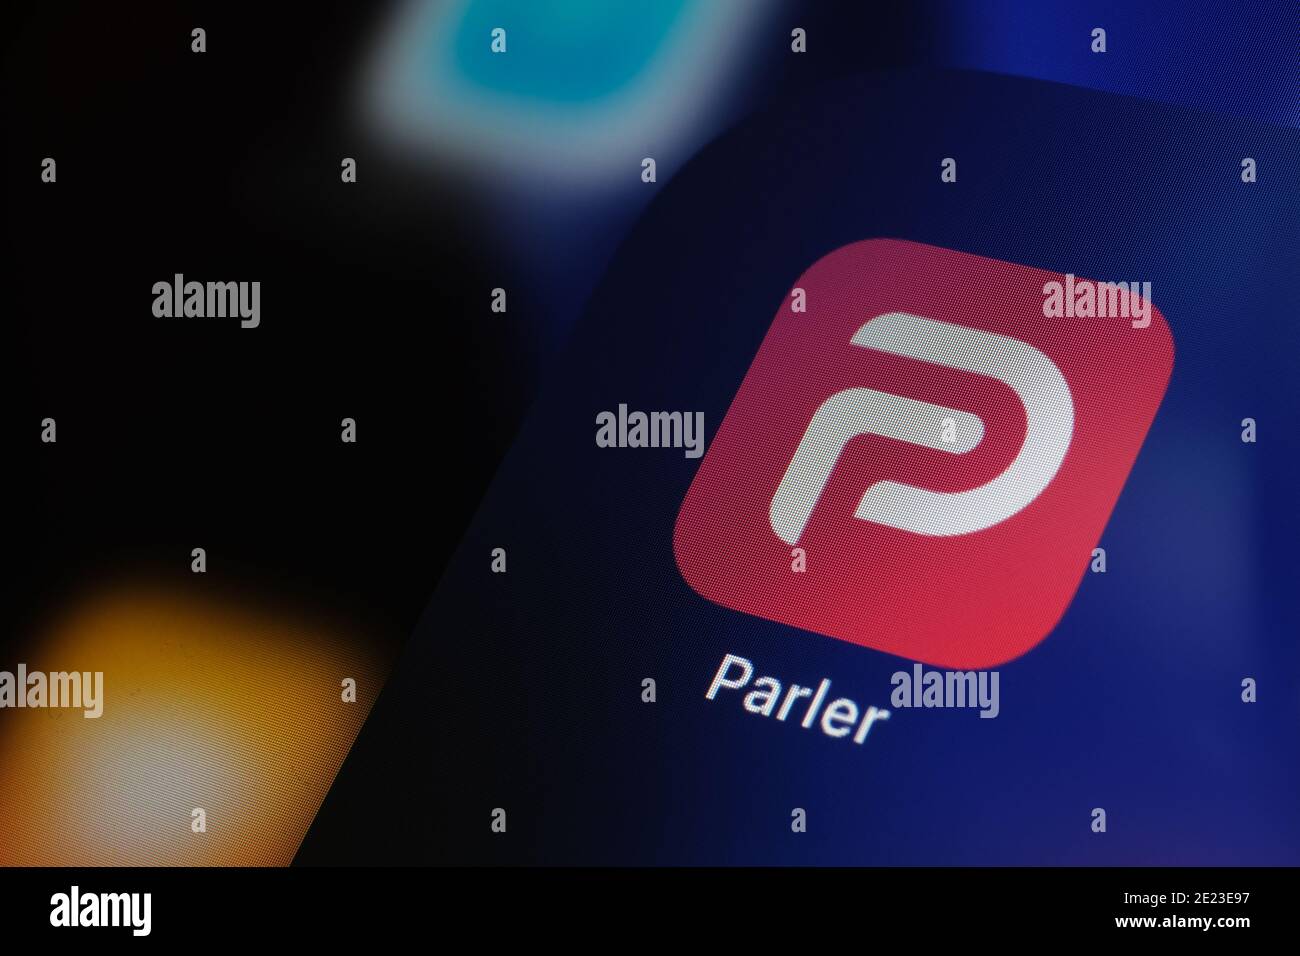 Parler app logo seen on the screen of iPad. Parler is a social media platform banned in the US. Stock Photo